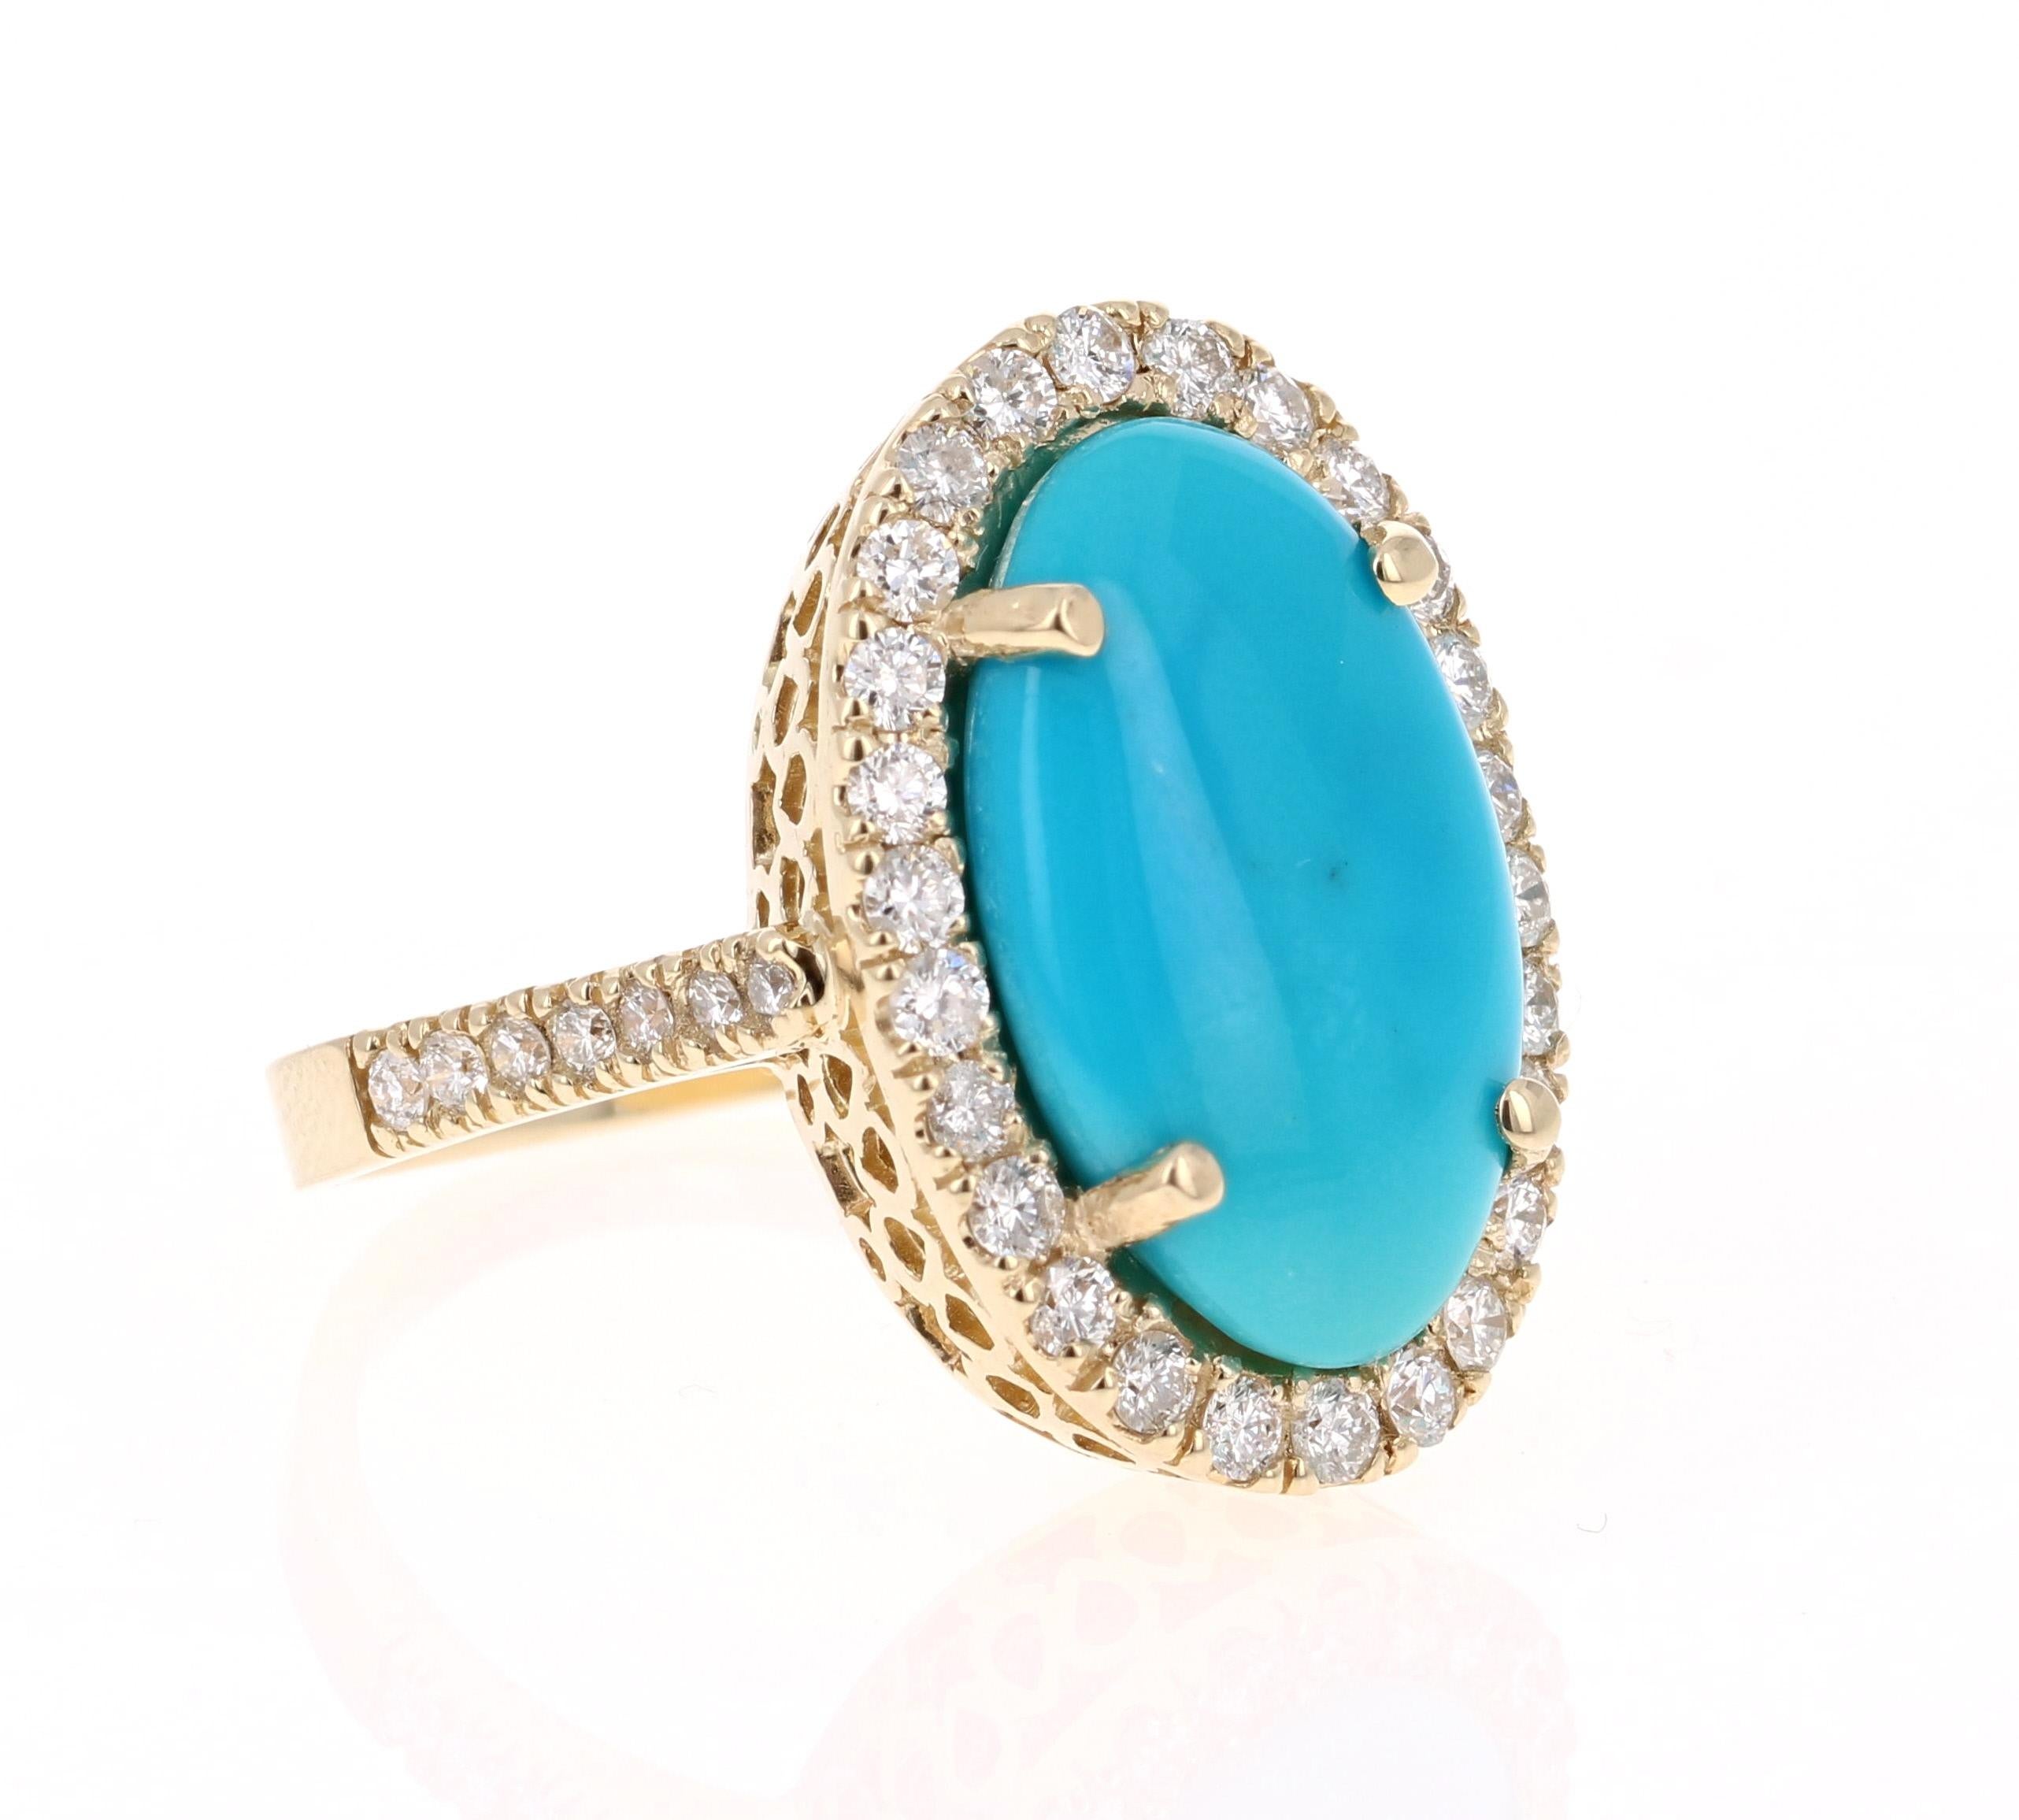 Beautiful Turquoise Diamond Cabochon Cocktail Ring!
The Oval Cut Cabochon Turquoise is 6.54 Carats and has a halo of 40 Round Cut Diamonds weighing 0.99 Carats.  The Clarity and Color of the Round Cut Diamonds is SI-F.   The total Carat Weight of